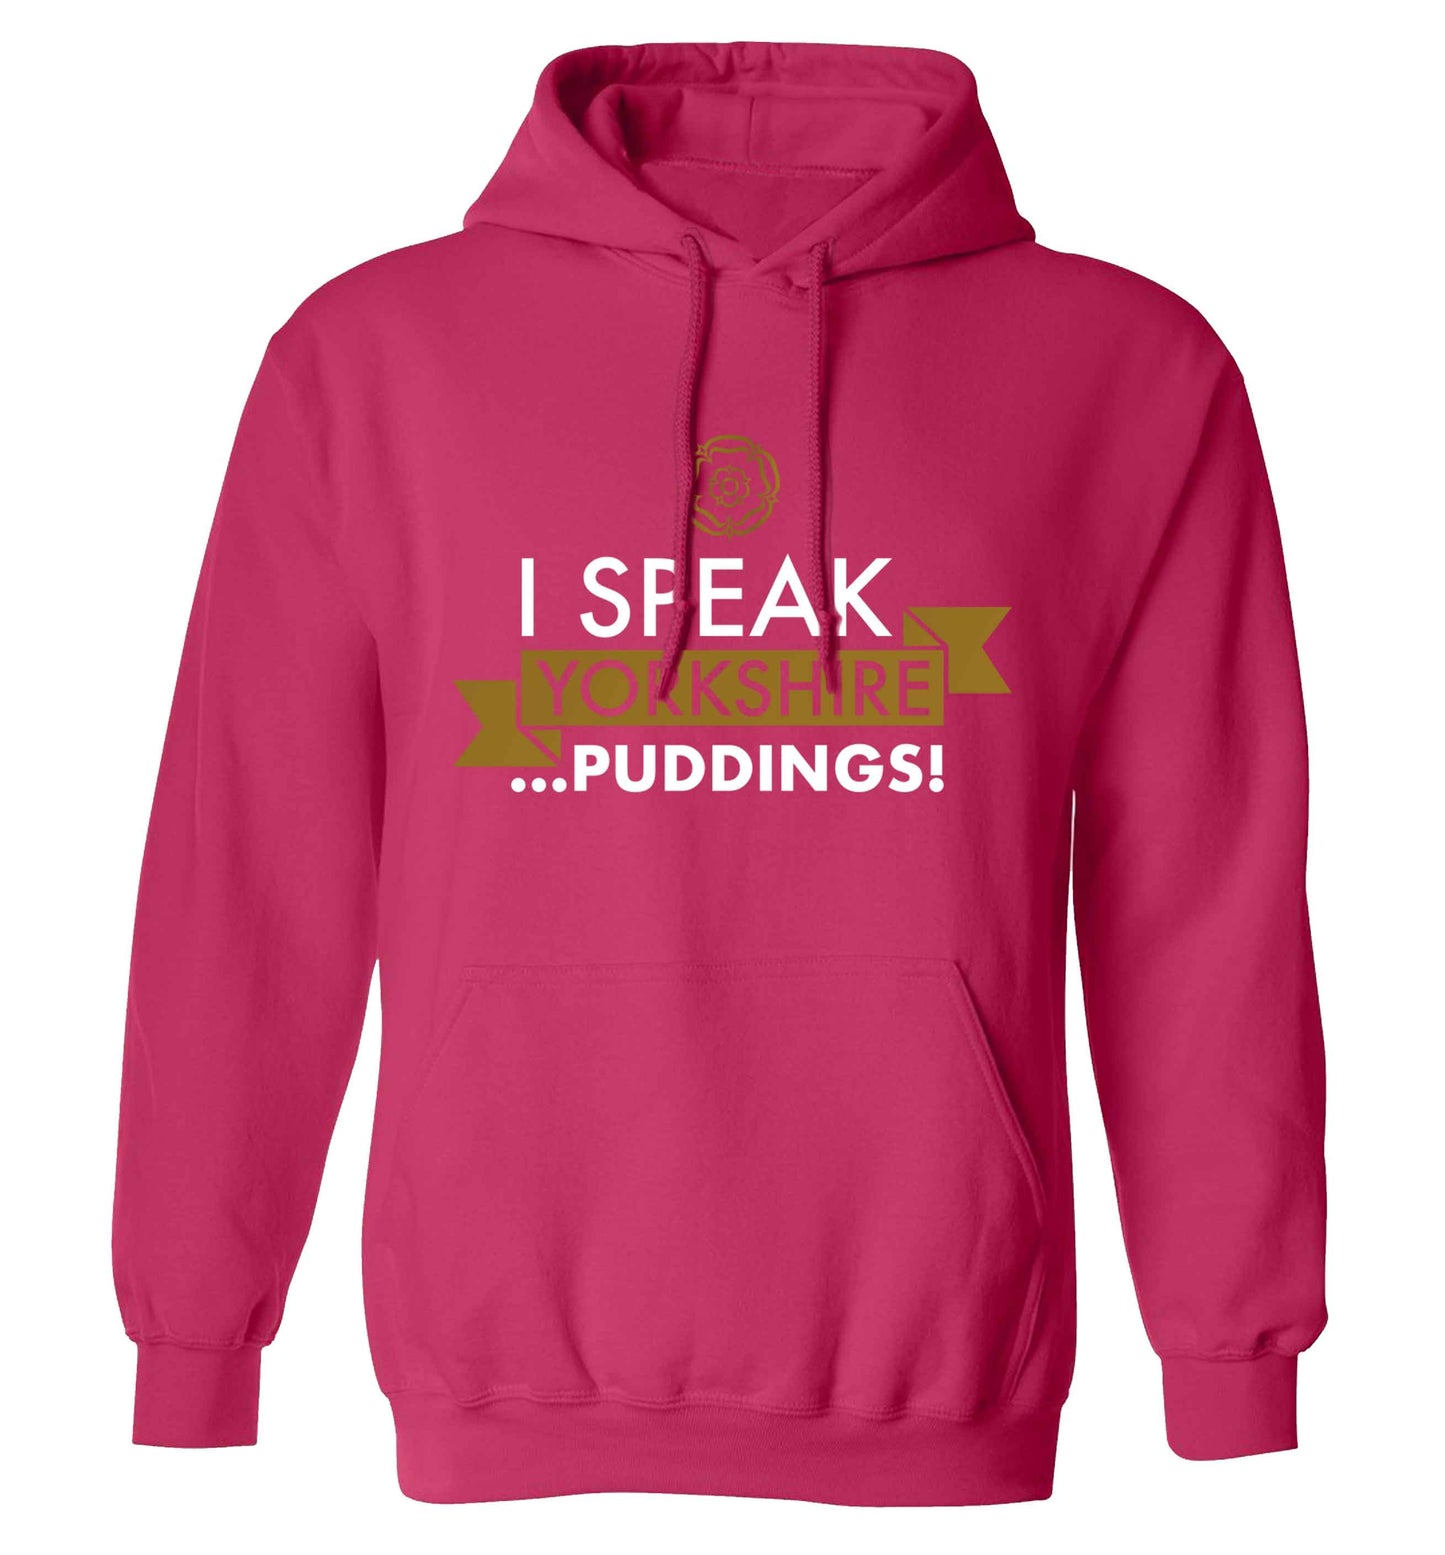 I speak Yorkshire...puddings adults unisex pink hoodie 2XL